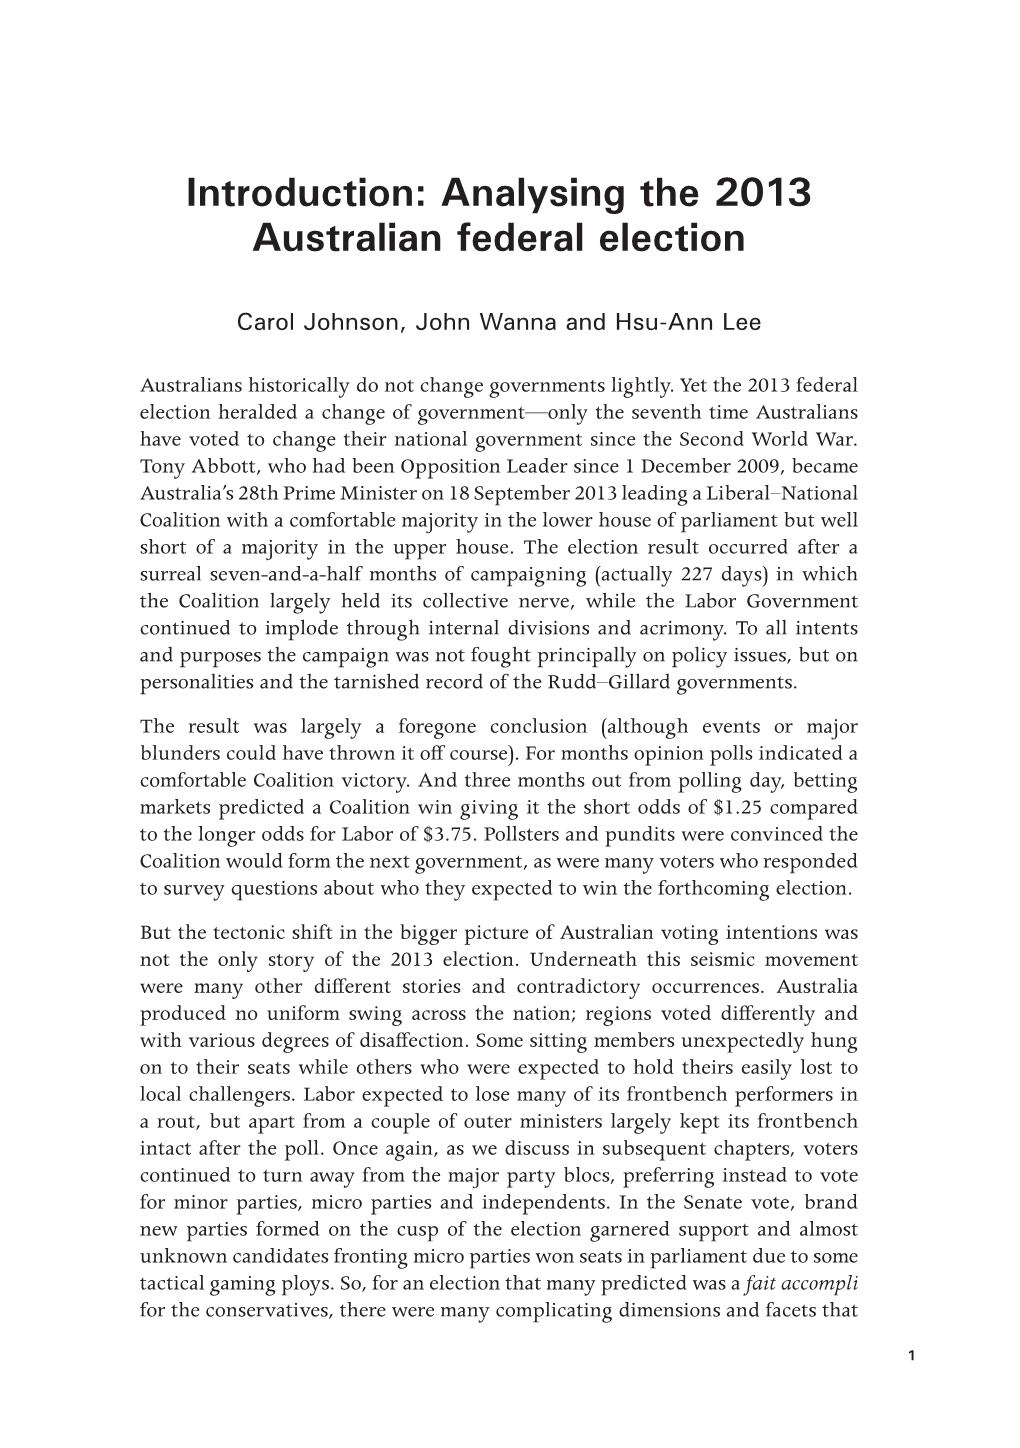 Analysing the 2013 Australian Federal Election